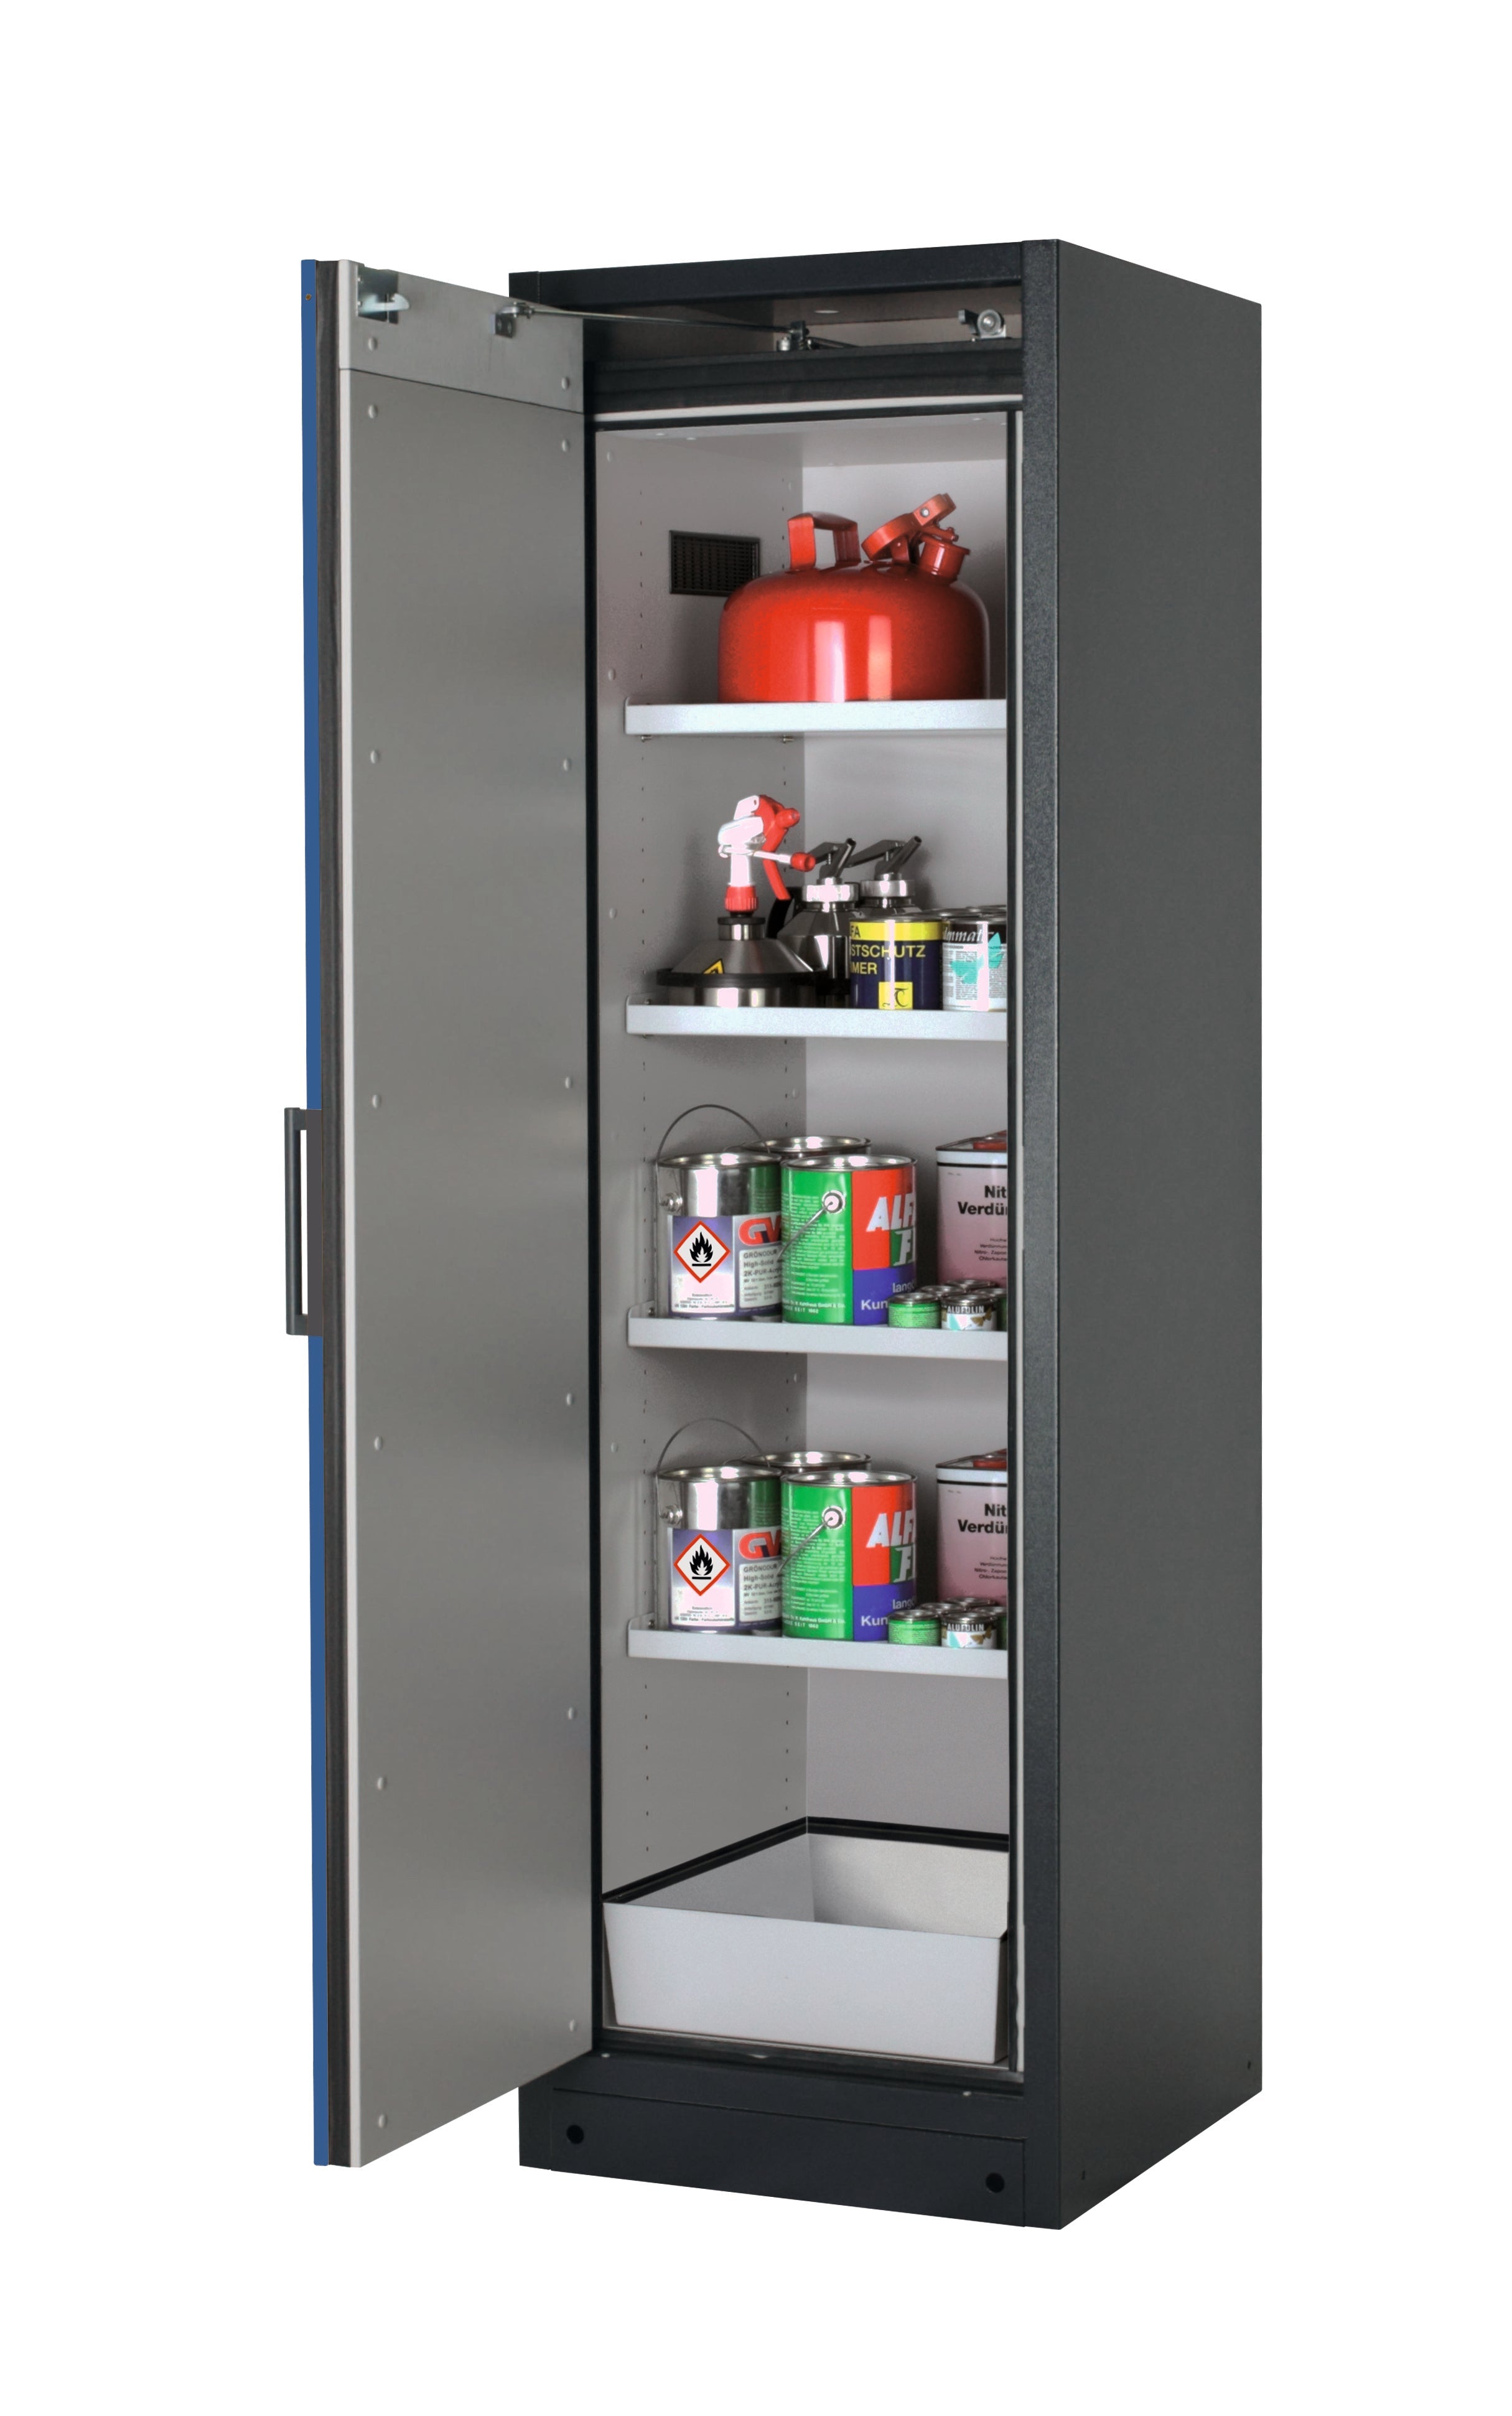 Type 90 safety storage cabinet Q-CLASSIC-90 model Q90.195.060 in gentian blue RAL 5010 with 4x shelf standard (sheet steel),